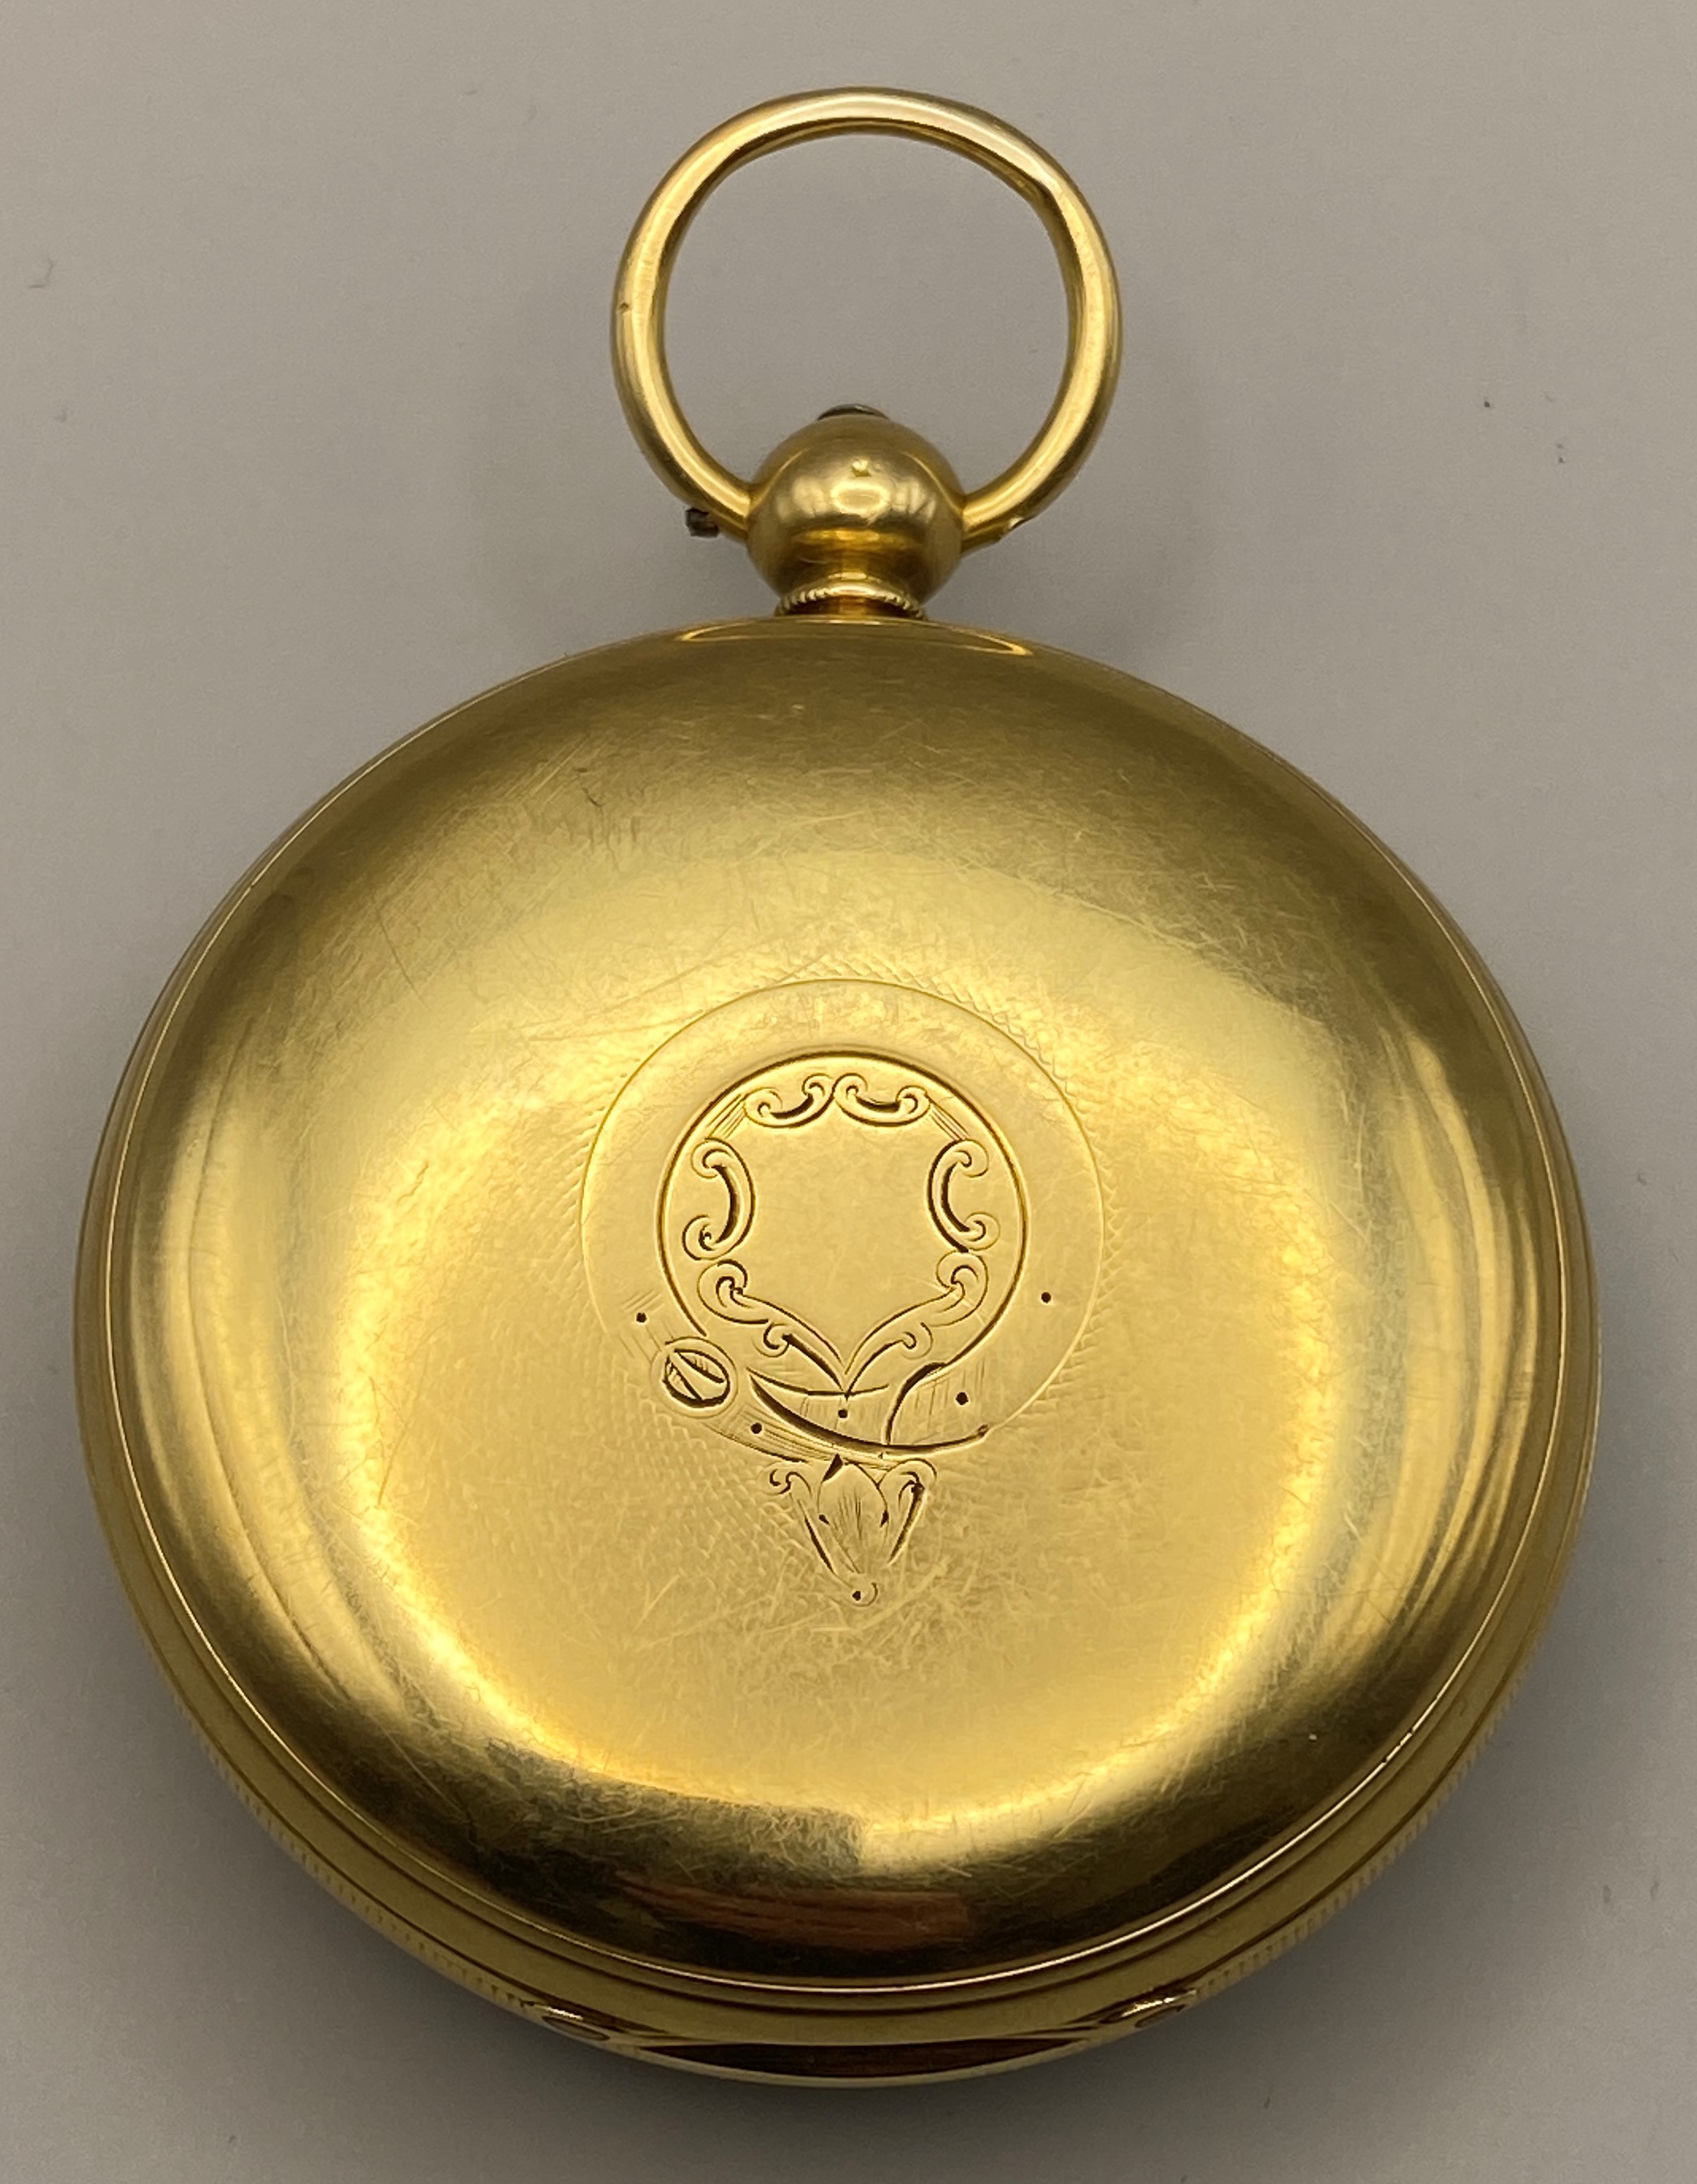 18ct Gold Fusee Pocket Watch by Gammon of Birmingham '1685', No.3584. - Image 12 of 48